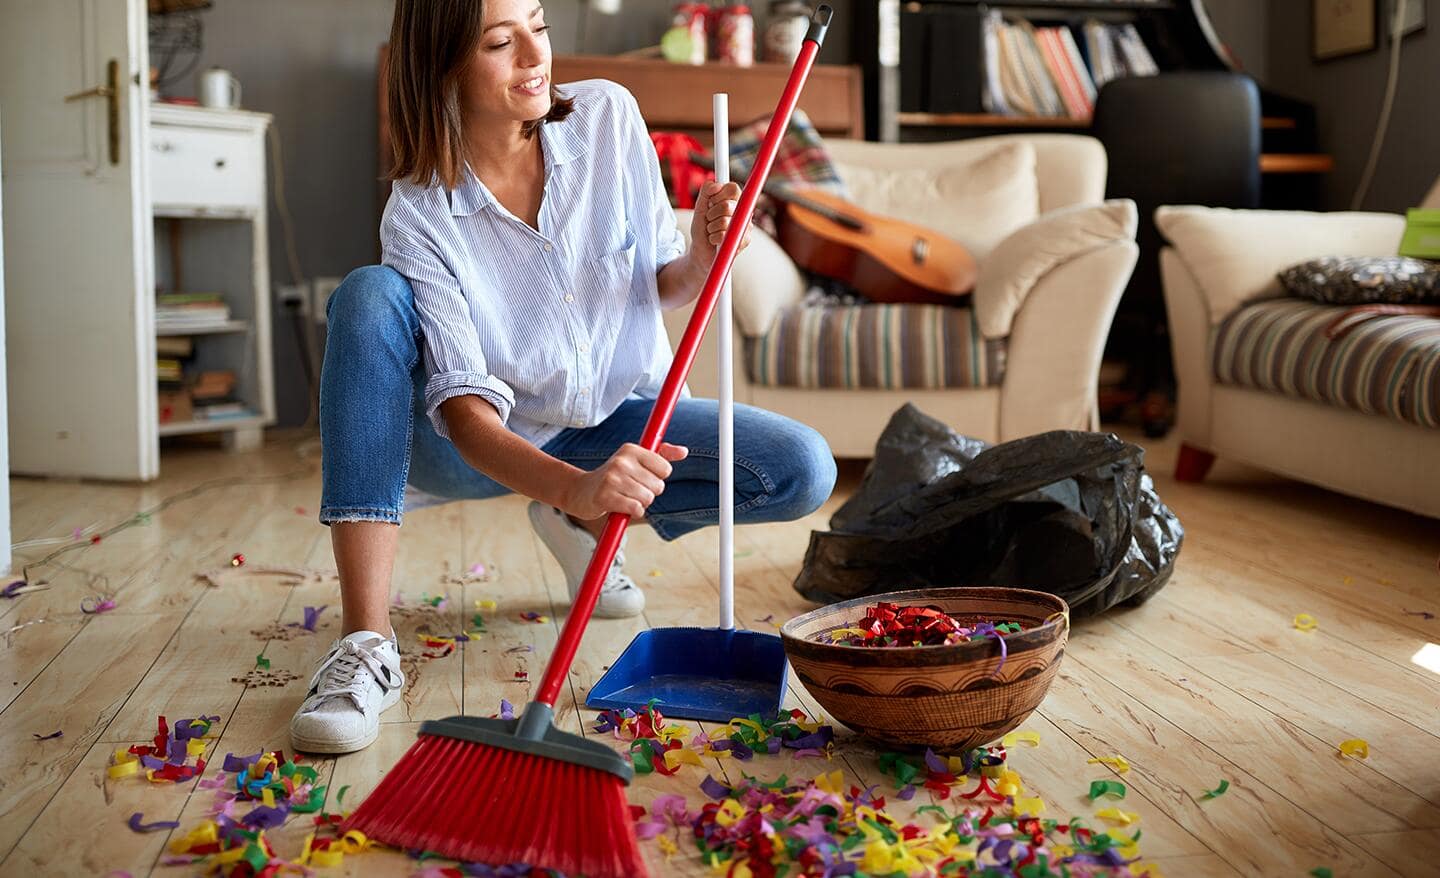 A woman using a broom and dust pan to clean up after a party.